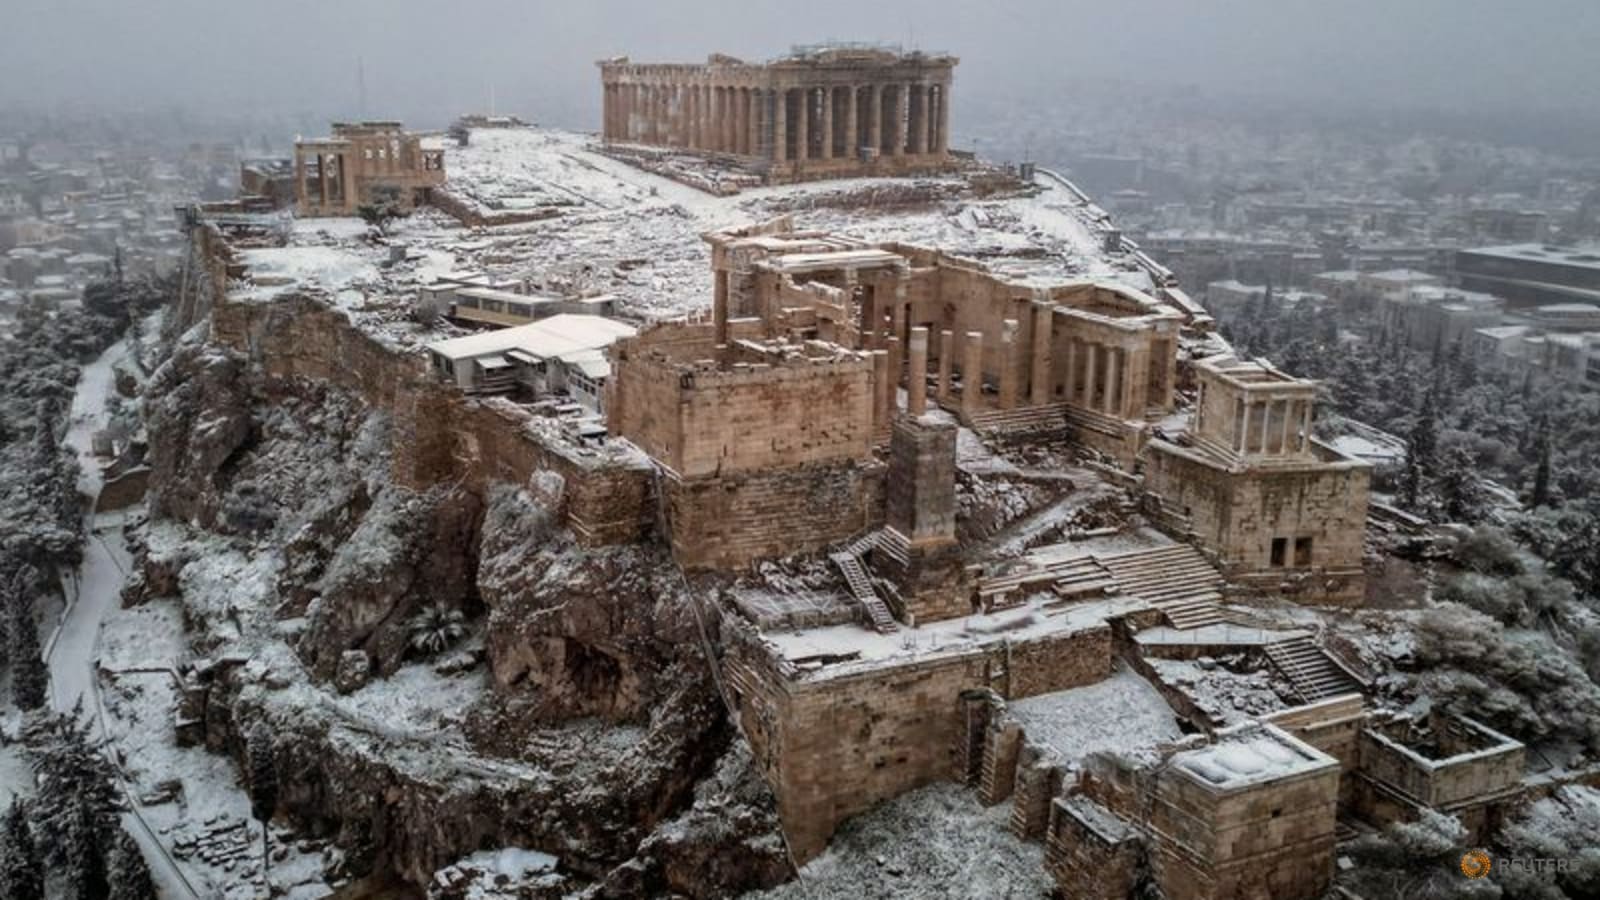 snowstorm-shuts-schools-and-shops,-disrupts-traffic-in-athens